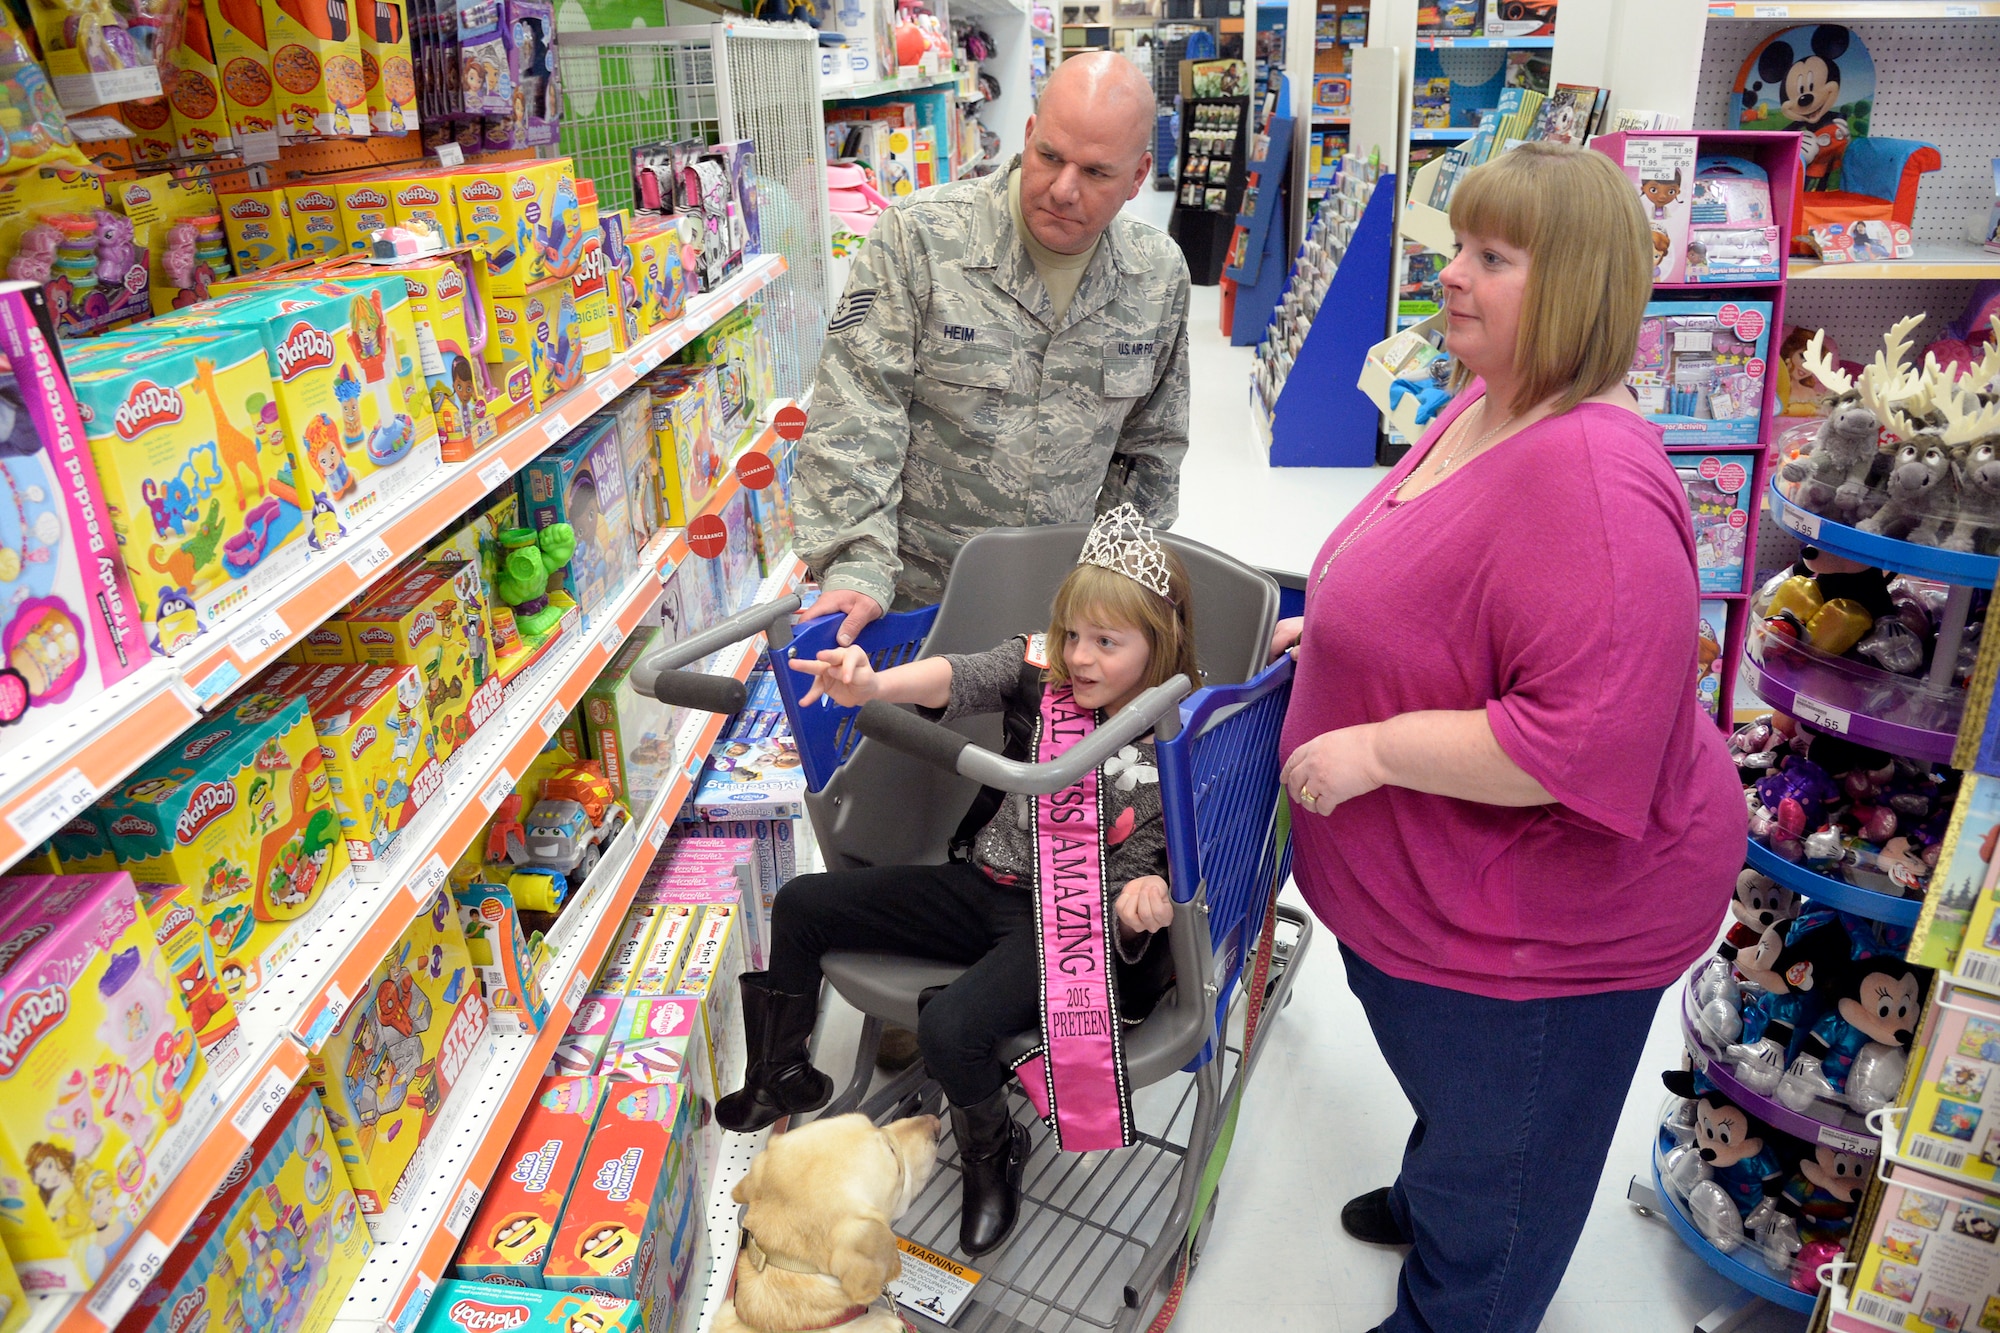 Tech. Sgt. Scott Heim, a member of the 388th Equipment Maintenance Squadron, his spouse Wendy, daughter Brieanna and family pet Emily use a Caroline’s Cart during a visit to the Base Exchange at Hill Air Force Base Feb. 4. A Caroline's Cart is built with a roomy seat and adjustable harness designed to ease the shopping experience for families with a special needs member. Hill AFB started seeking a Caroline's Cart for the base in June 2014 after hearing about the product from special needs families. The Commissary purchased one in October 2015 and it has benefited many families since. (U.S. Air Force photo by Todd Cromar)